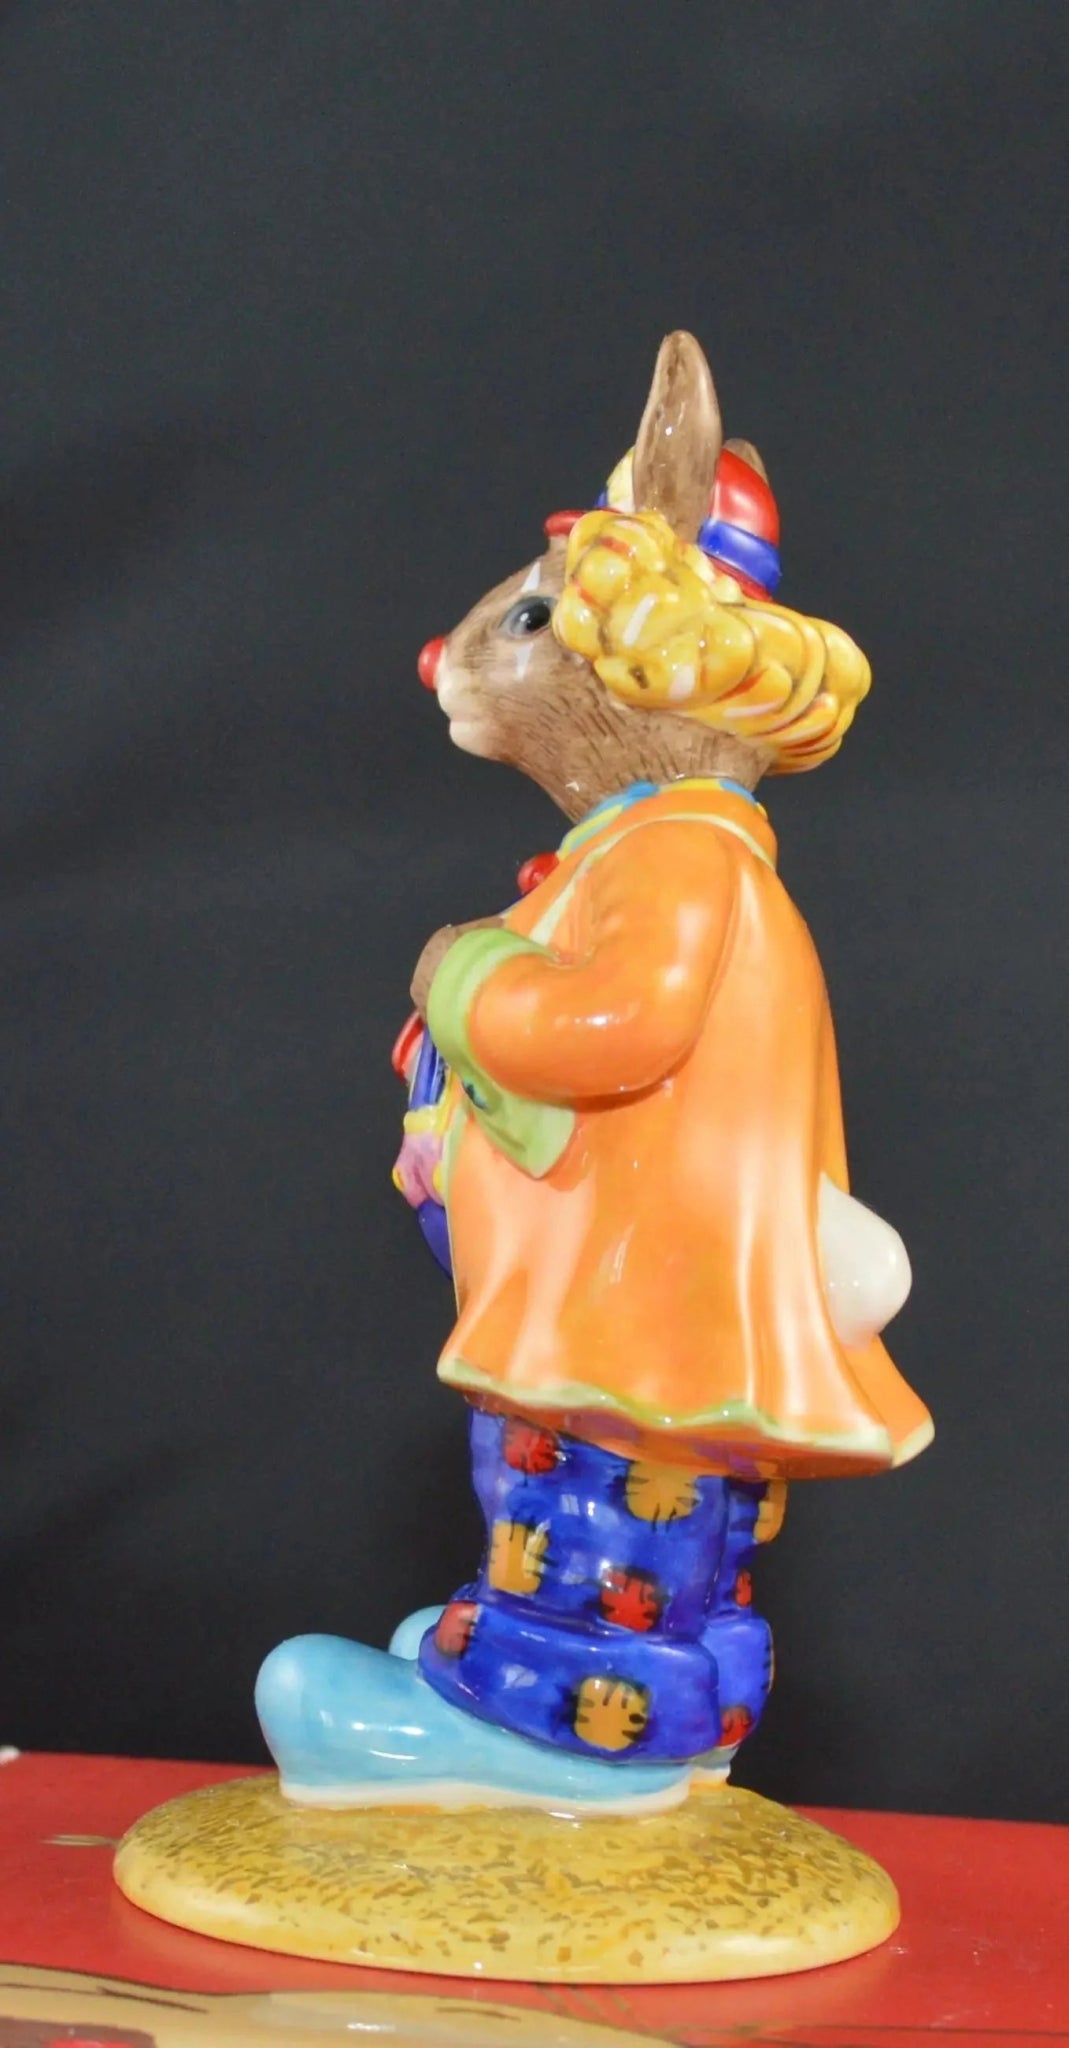 BOXED ROYAL DOULTON BUNNYKINS CLARENCE THE CLOWN DB332 (PREVIOUSLY OWNED)VERY GOOD CONDITION - TMD167207